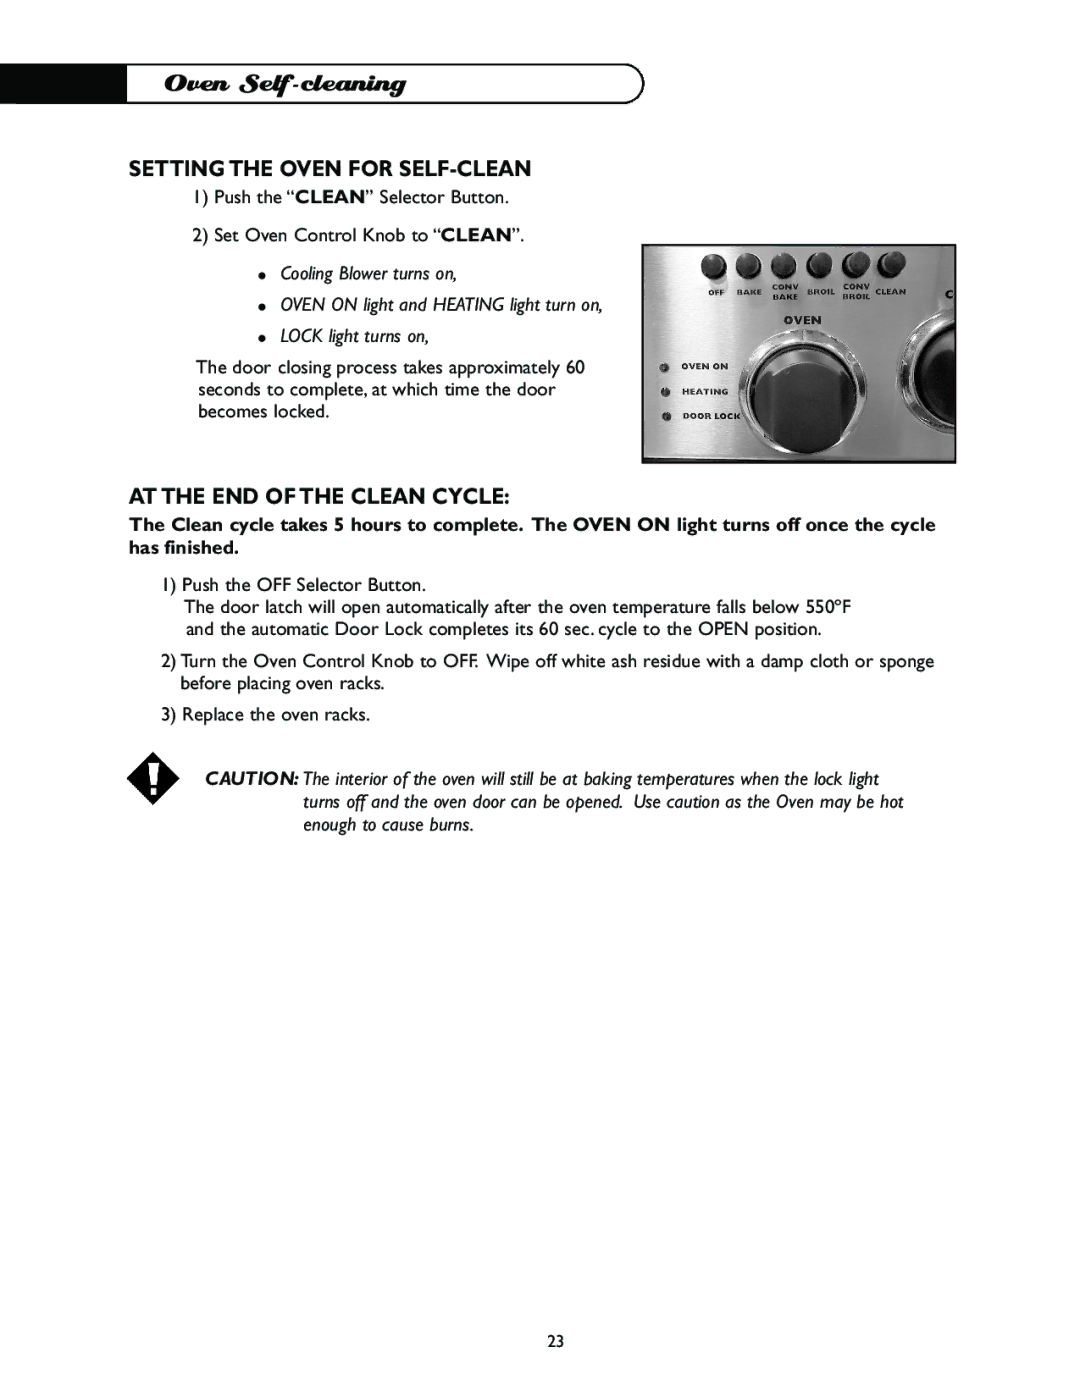 DCS I RGSC-305WT manual Setting the Oven for SELF-CLEAN, AT the END of the Clean Cycle, Push the OFF Selector Button 